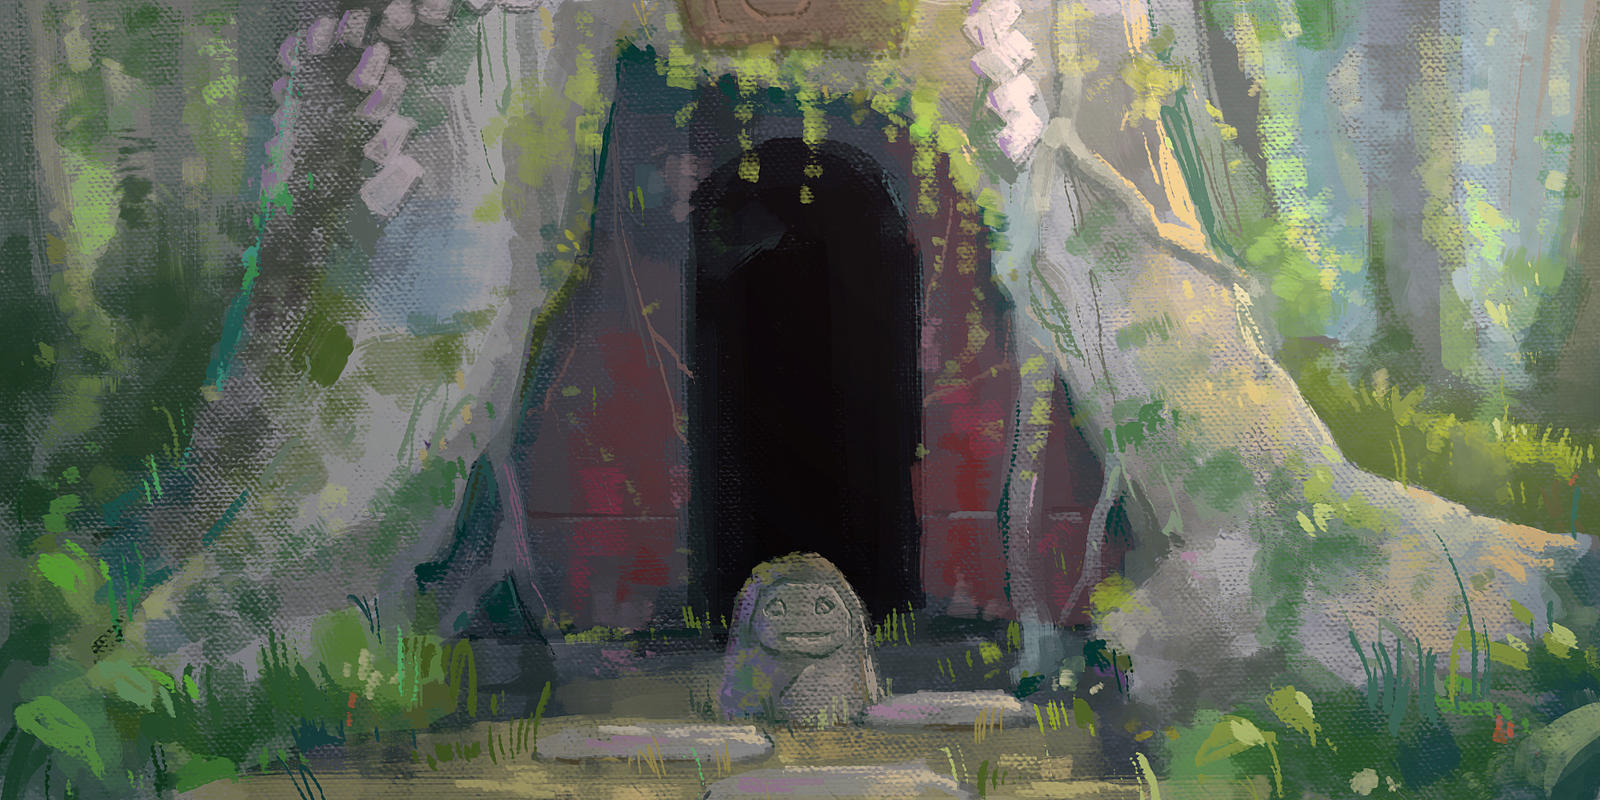 redesign ghost town's entrance (spirited away)